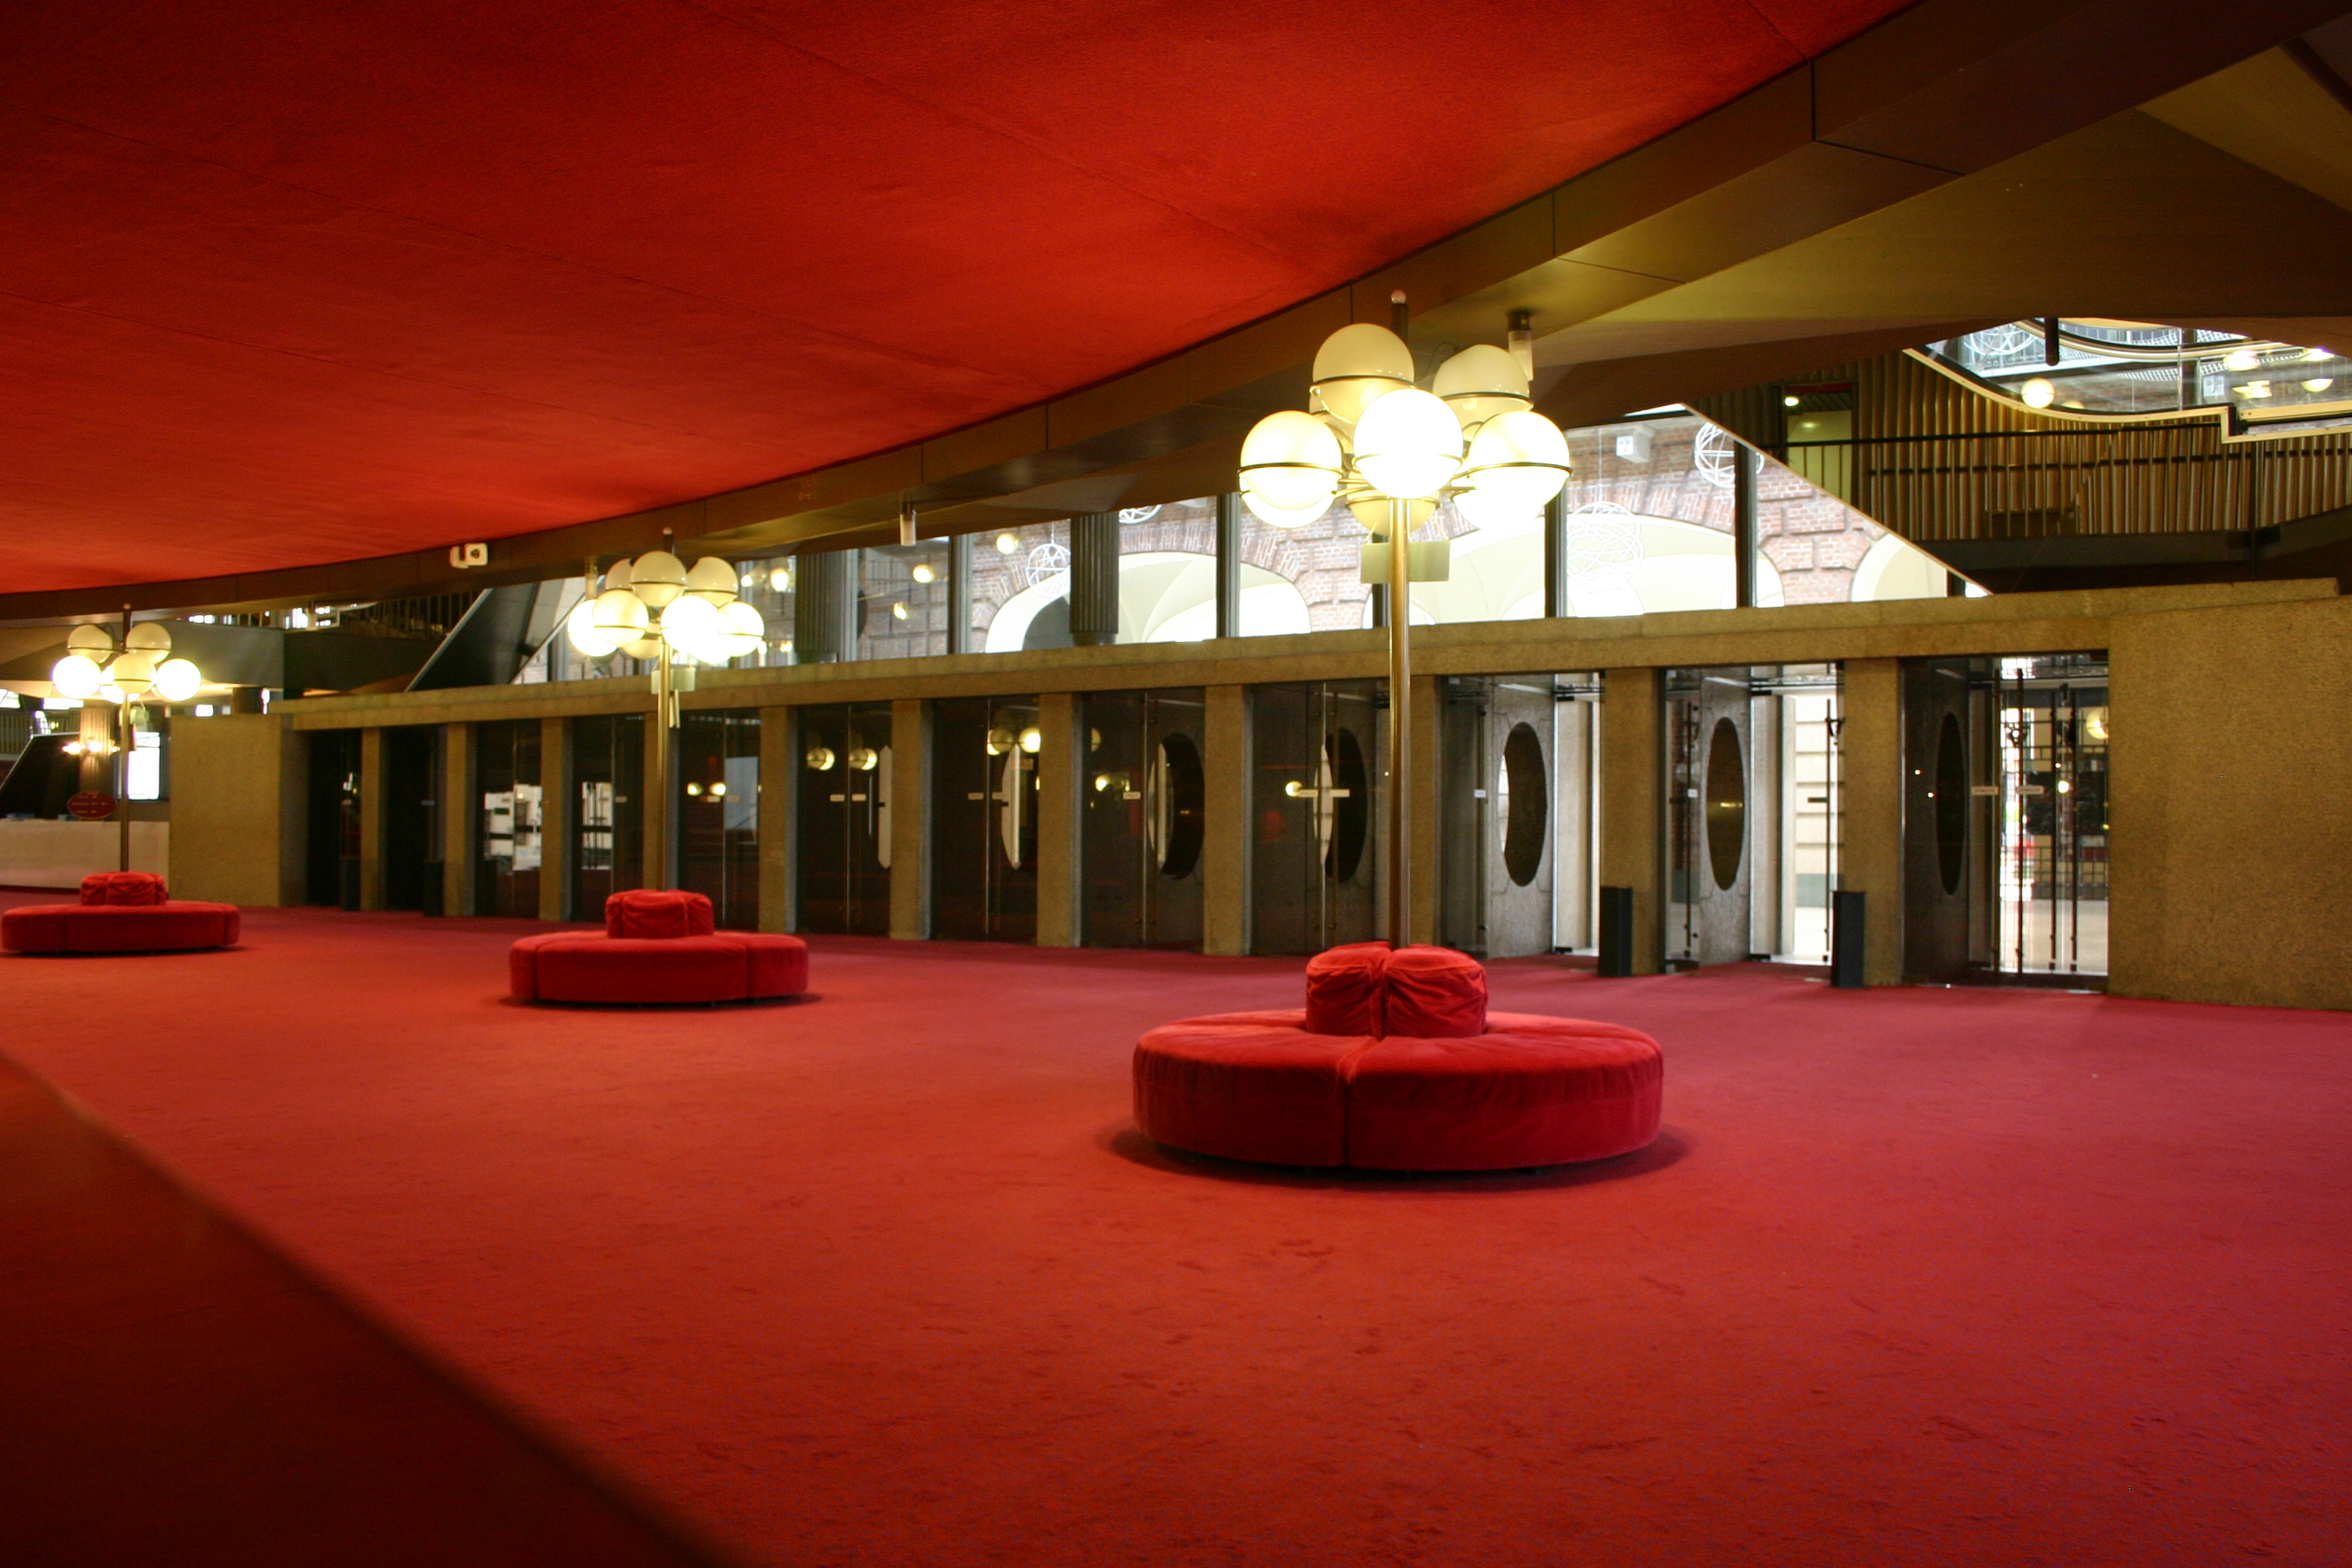 The main entrance of Teatro Regio seen from inside